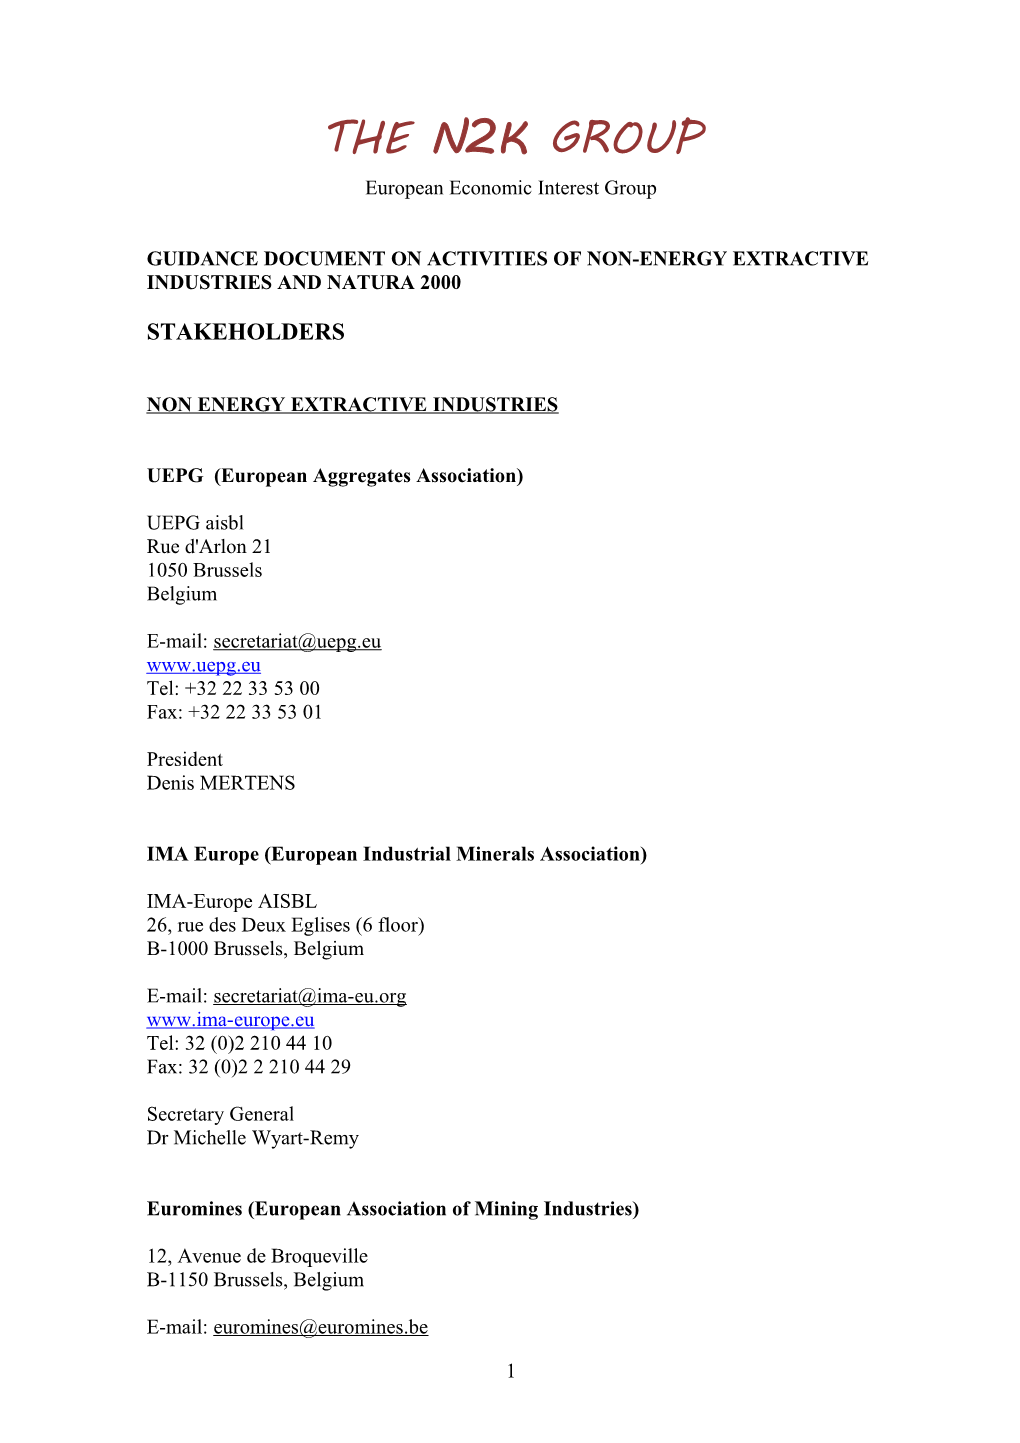 Guidance Document on Activities of Non-Energy Extractive Industries and Natura 2000